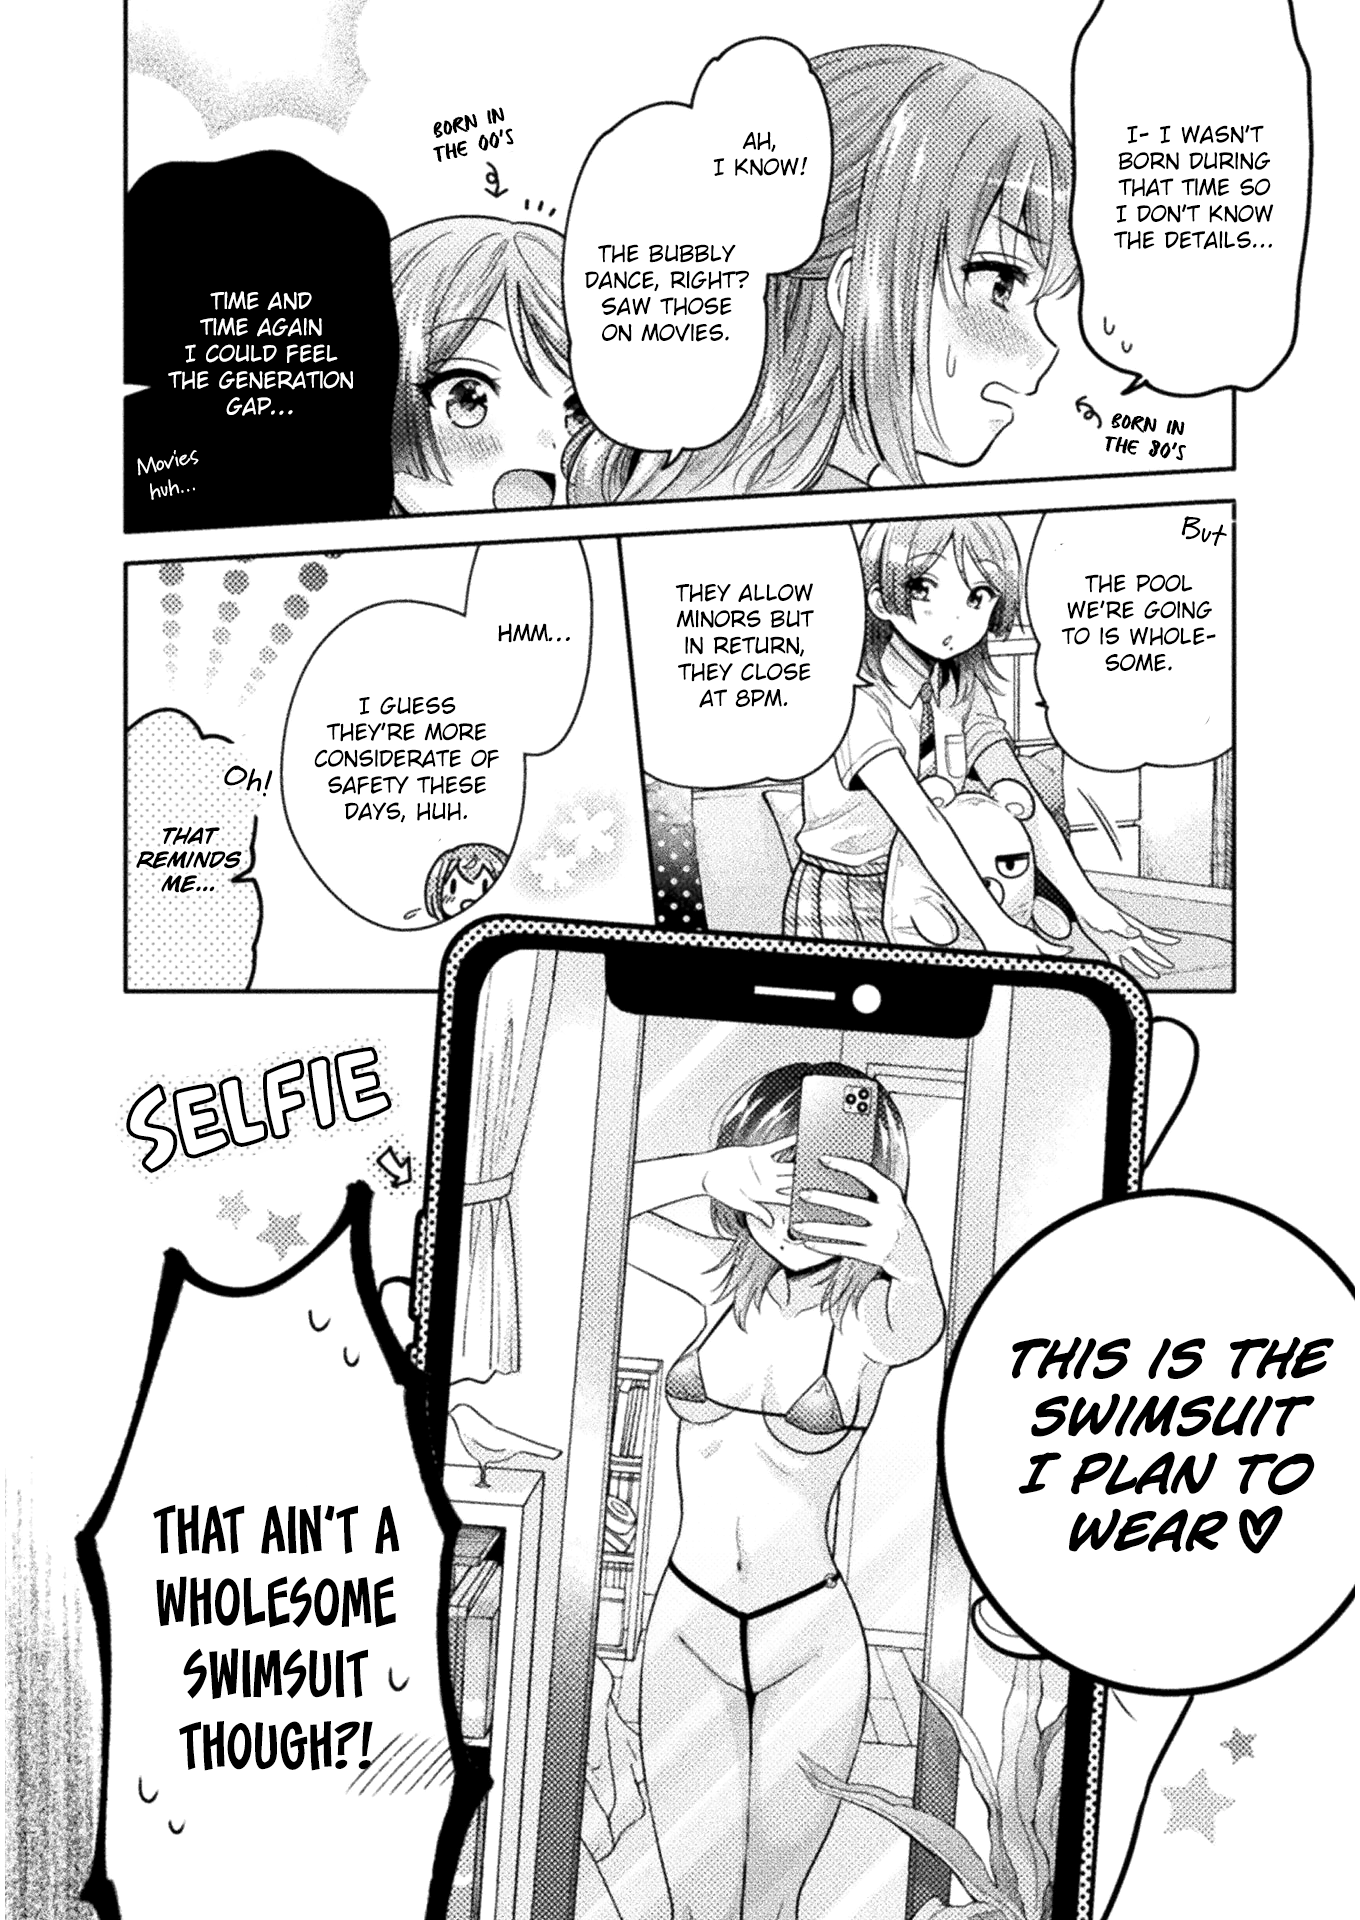 Housewife X Jk - Page 3